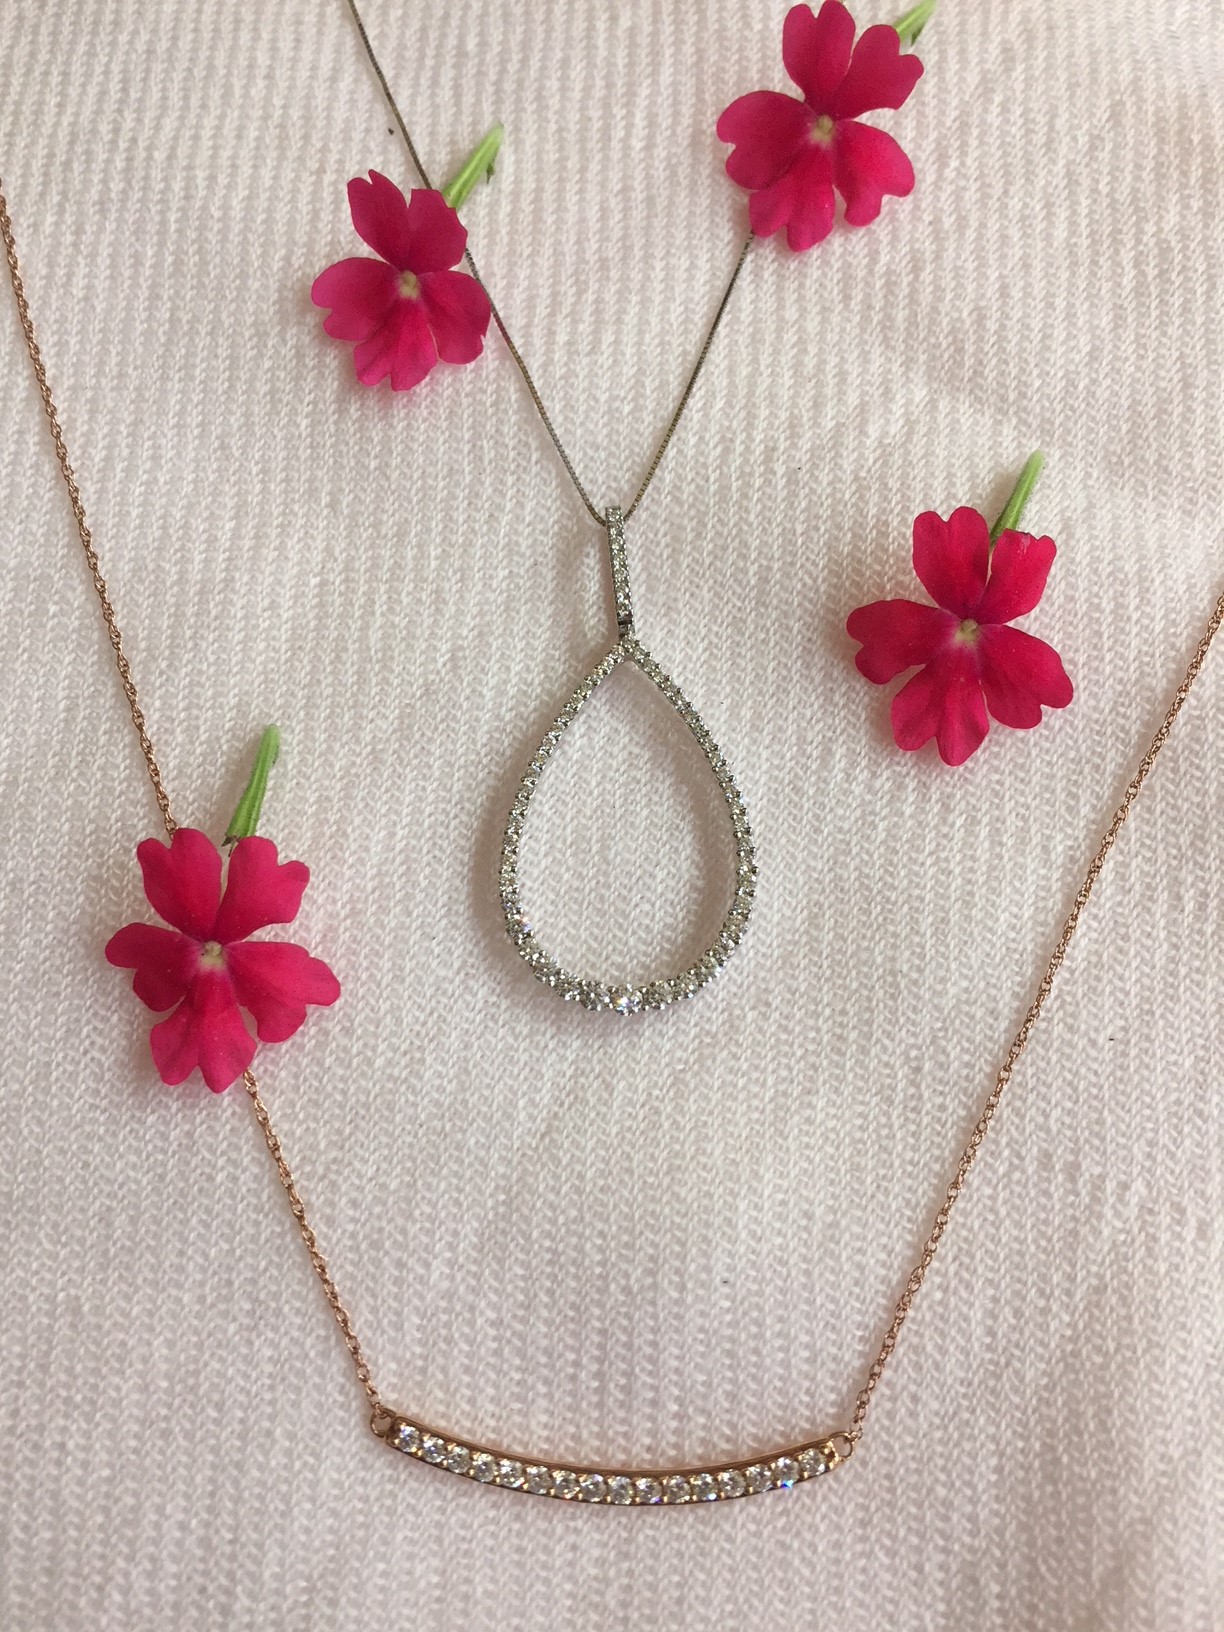 Diamond Necklaces with Flowers